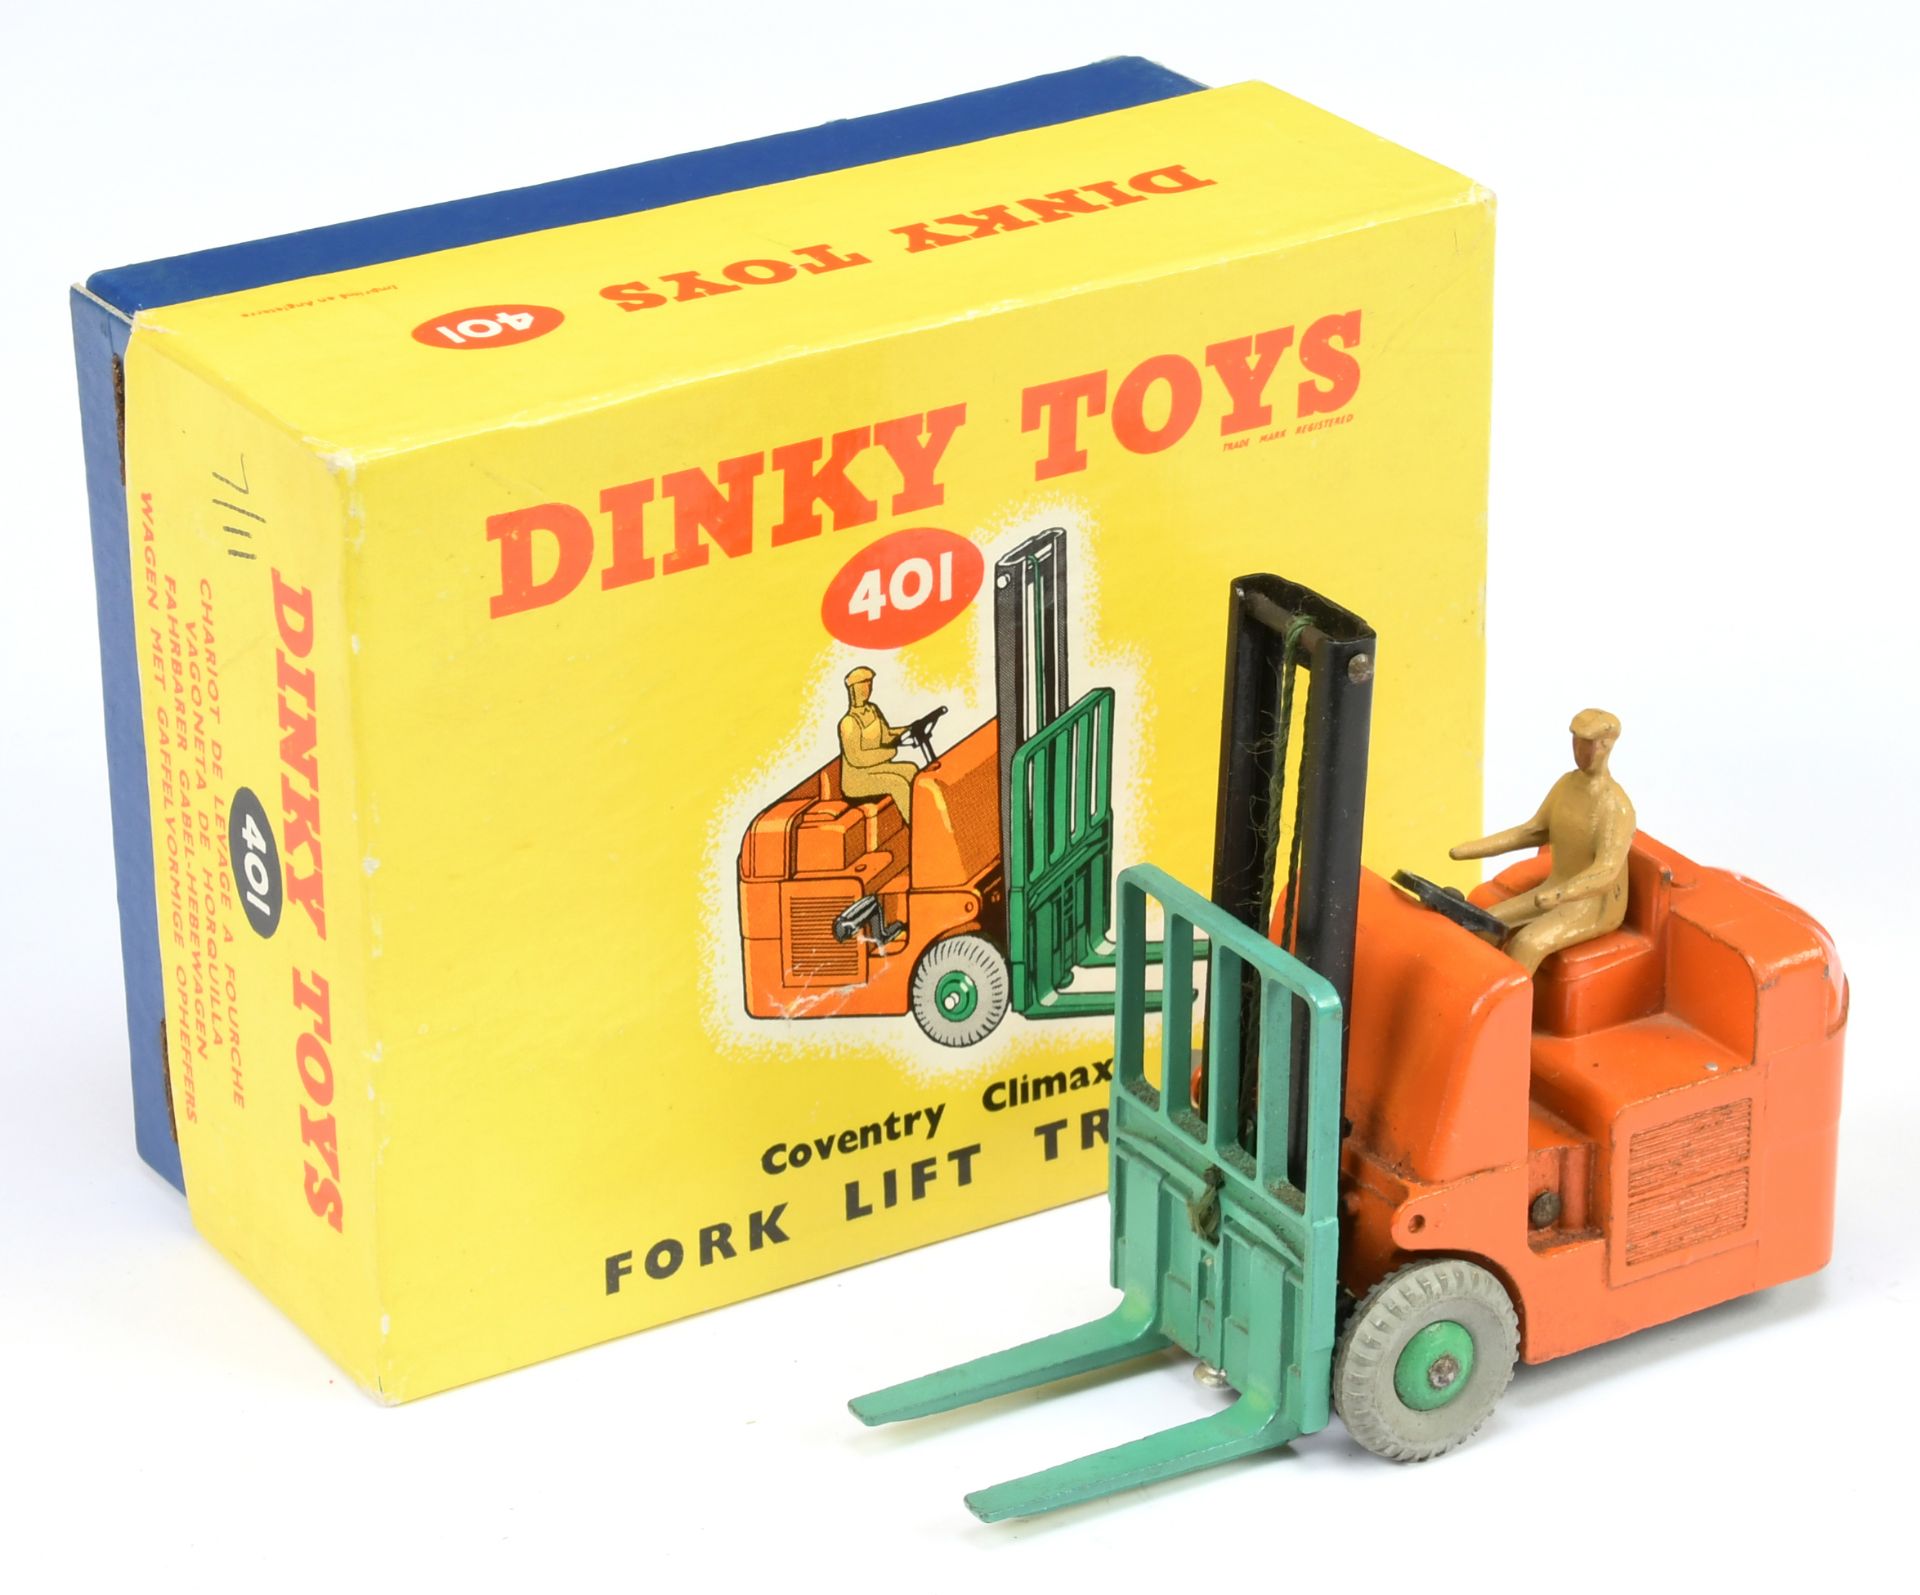 Dinky Toys 401 Coventry Climax Fork Lift Truck - Burnt orange body, black mast, mid-green forks a...